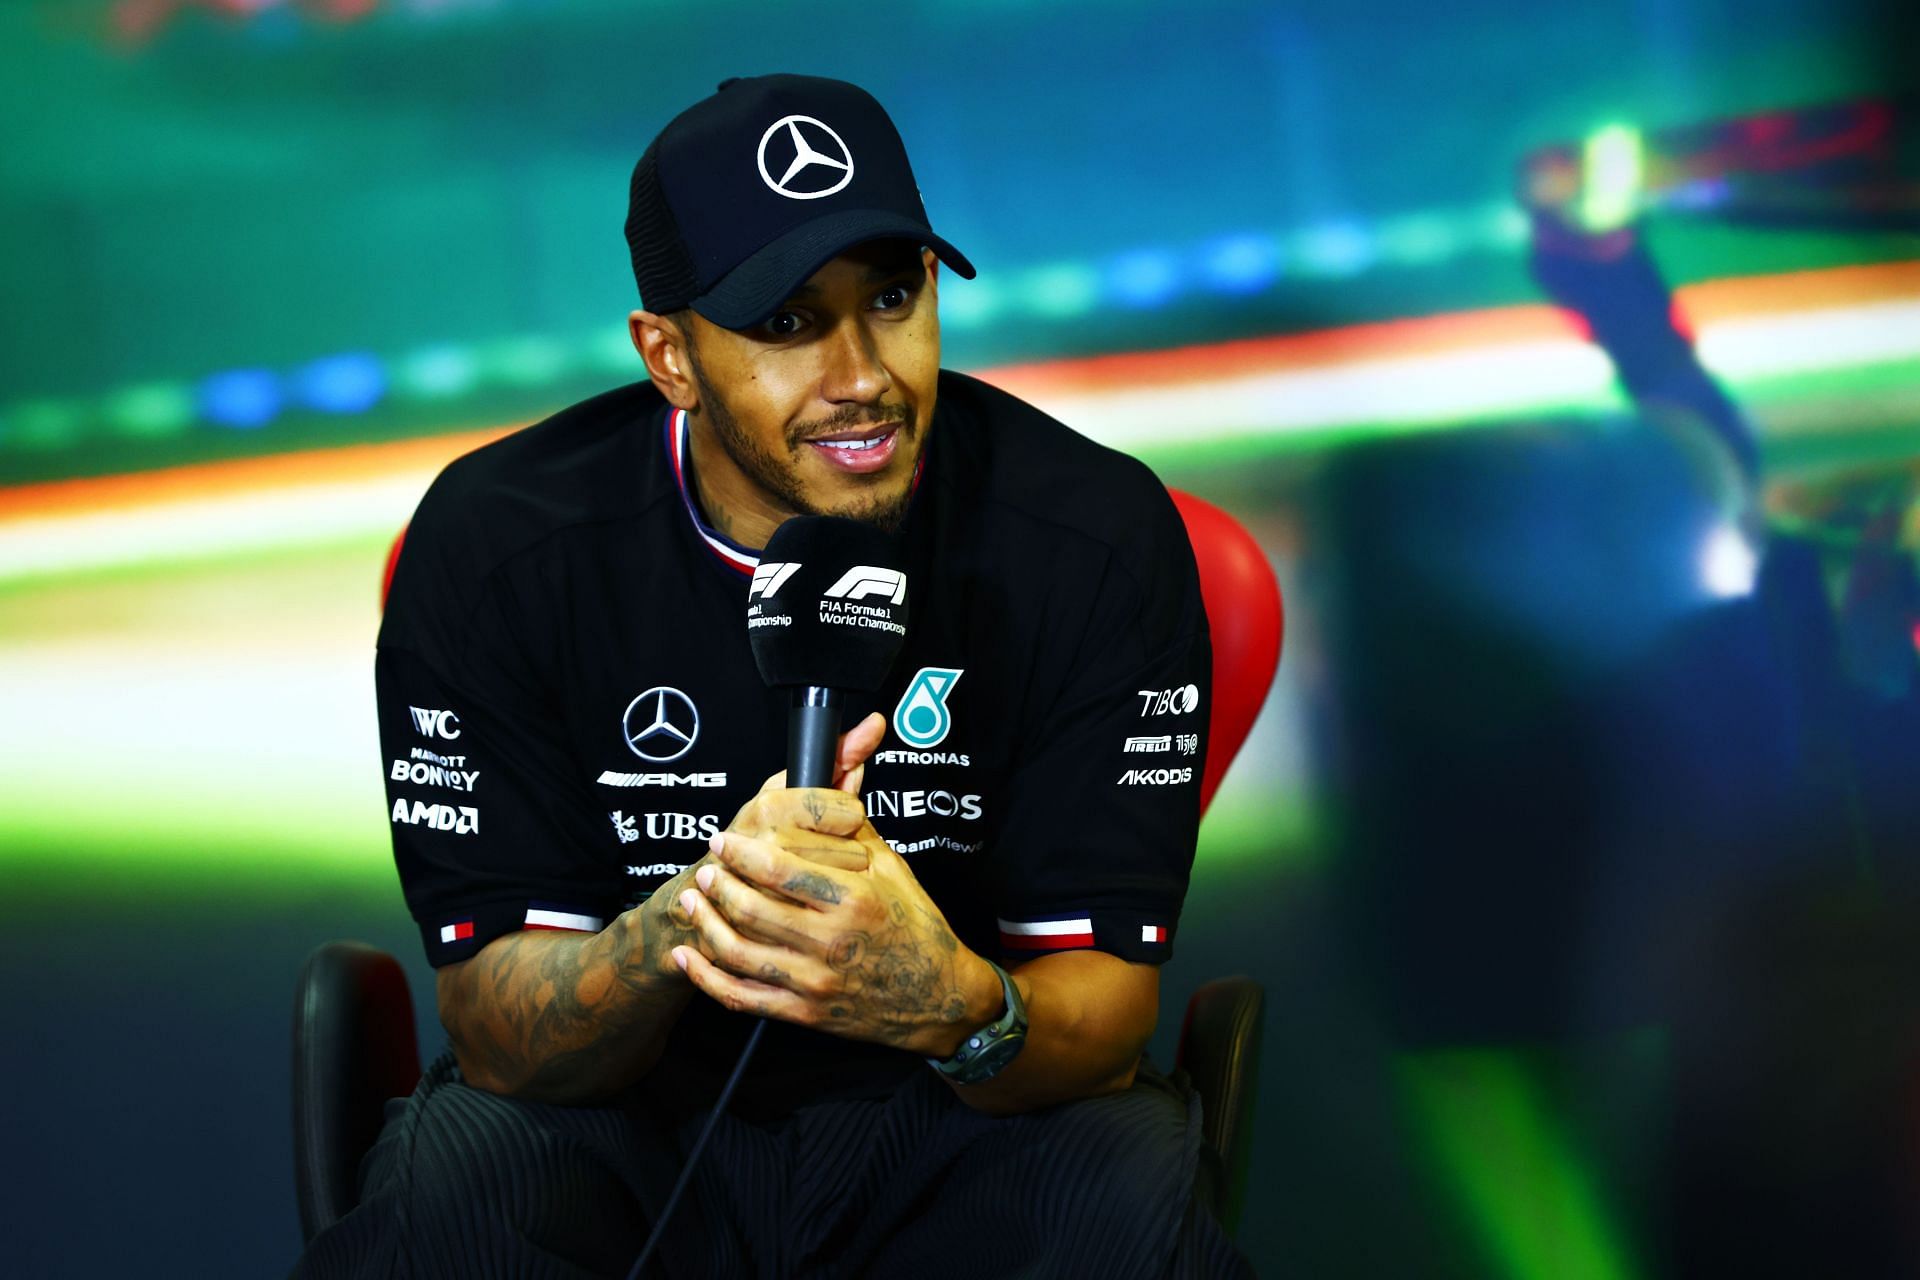 Hamilton has opened up on the tragic aftermath of what happened in Abu Dhabi last season